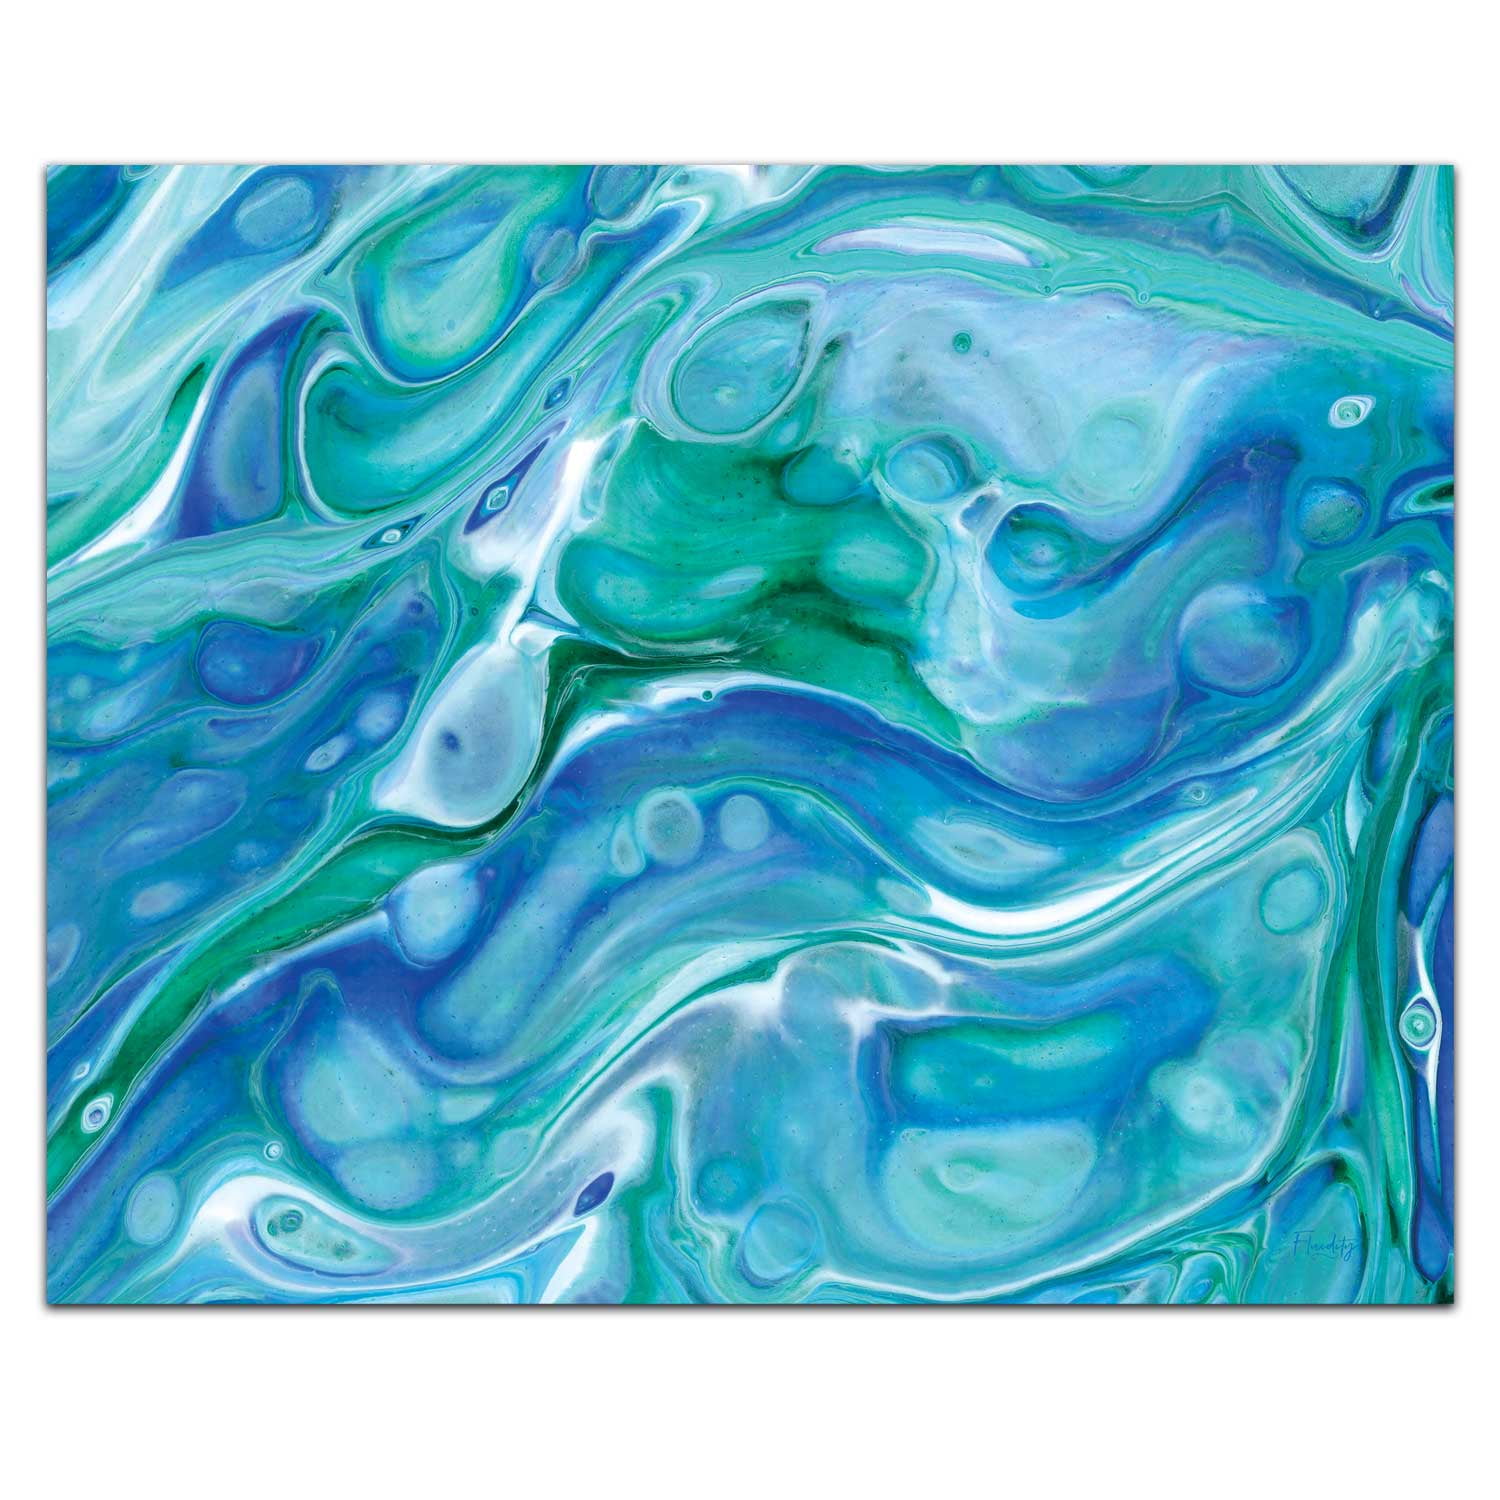 Glass Chopping Cutting Board Work Top Saver Large Blue White Wave Ocean Cool